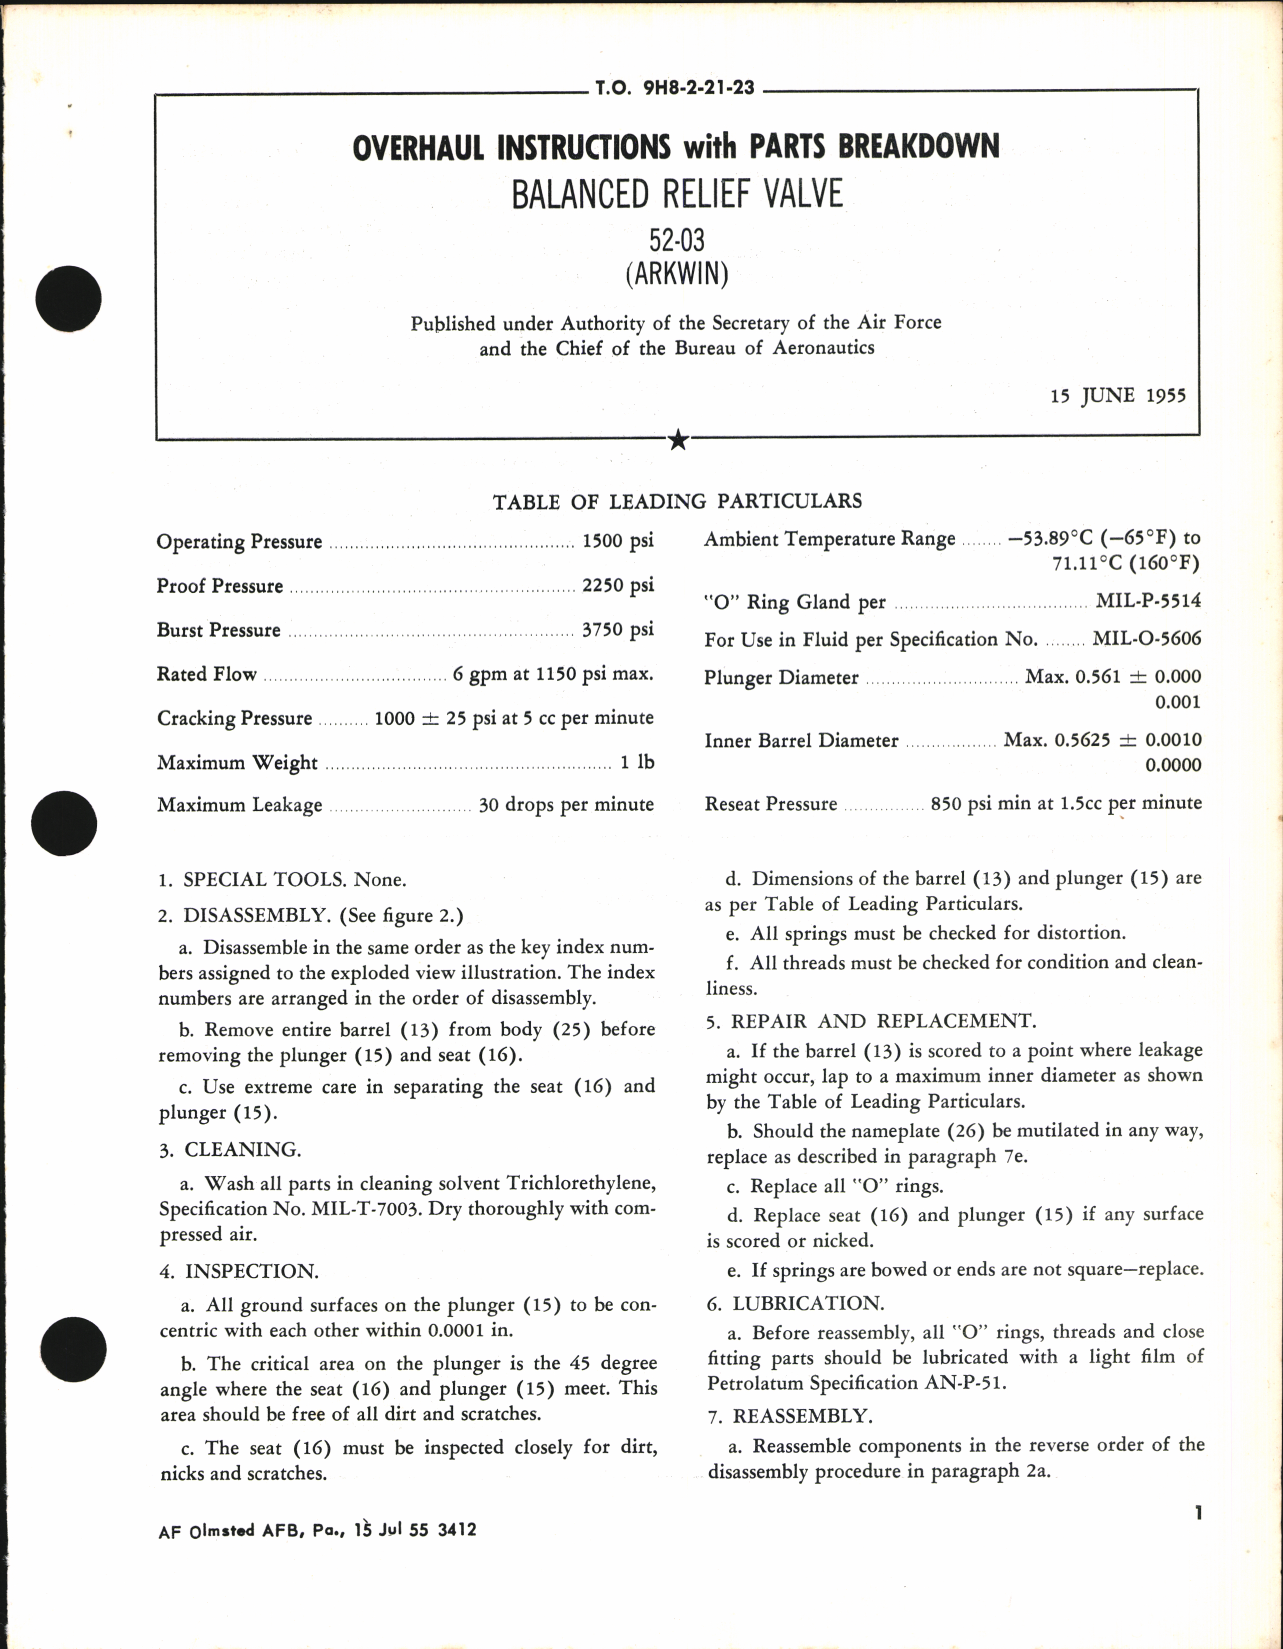 Sample page 1 from AirCorps Library document: Overhaul Instructions with Parts Breakdown for Balanced Relief Valve 52-03